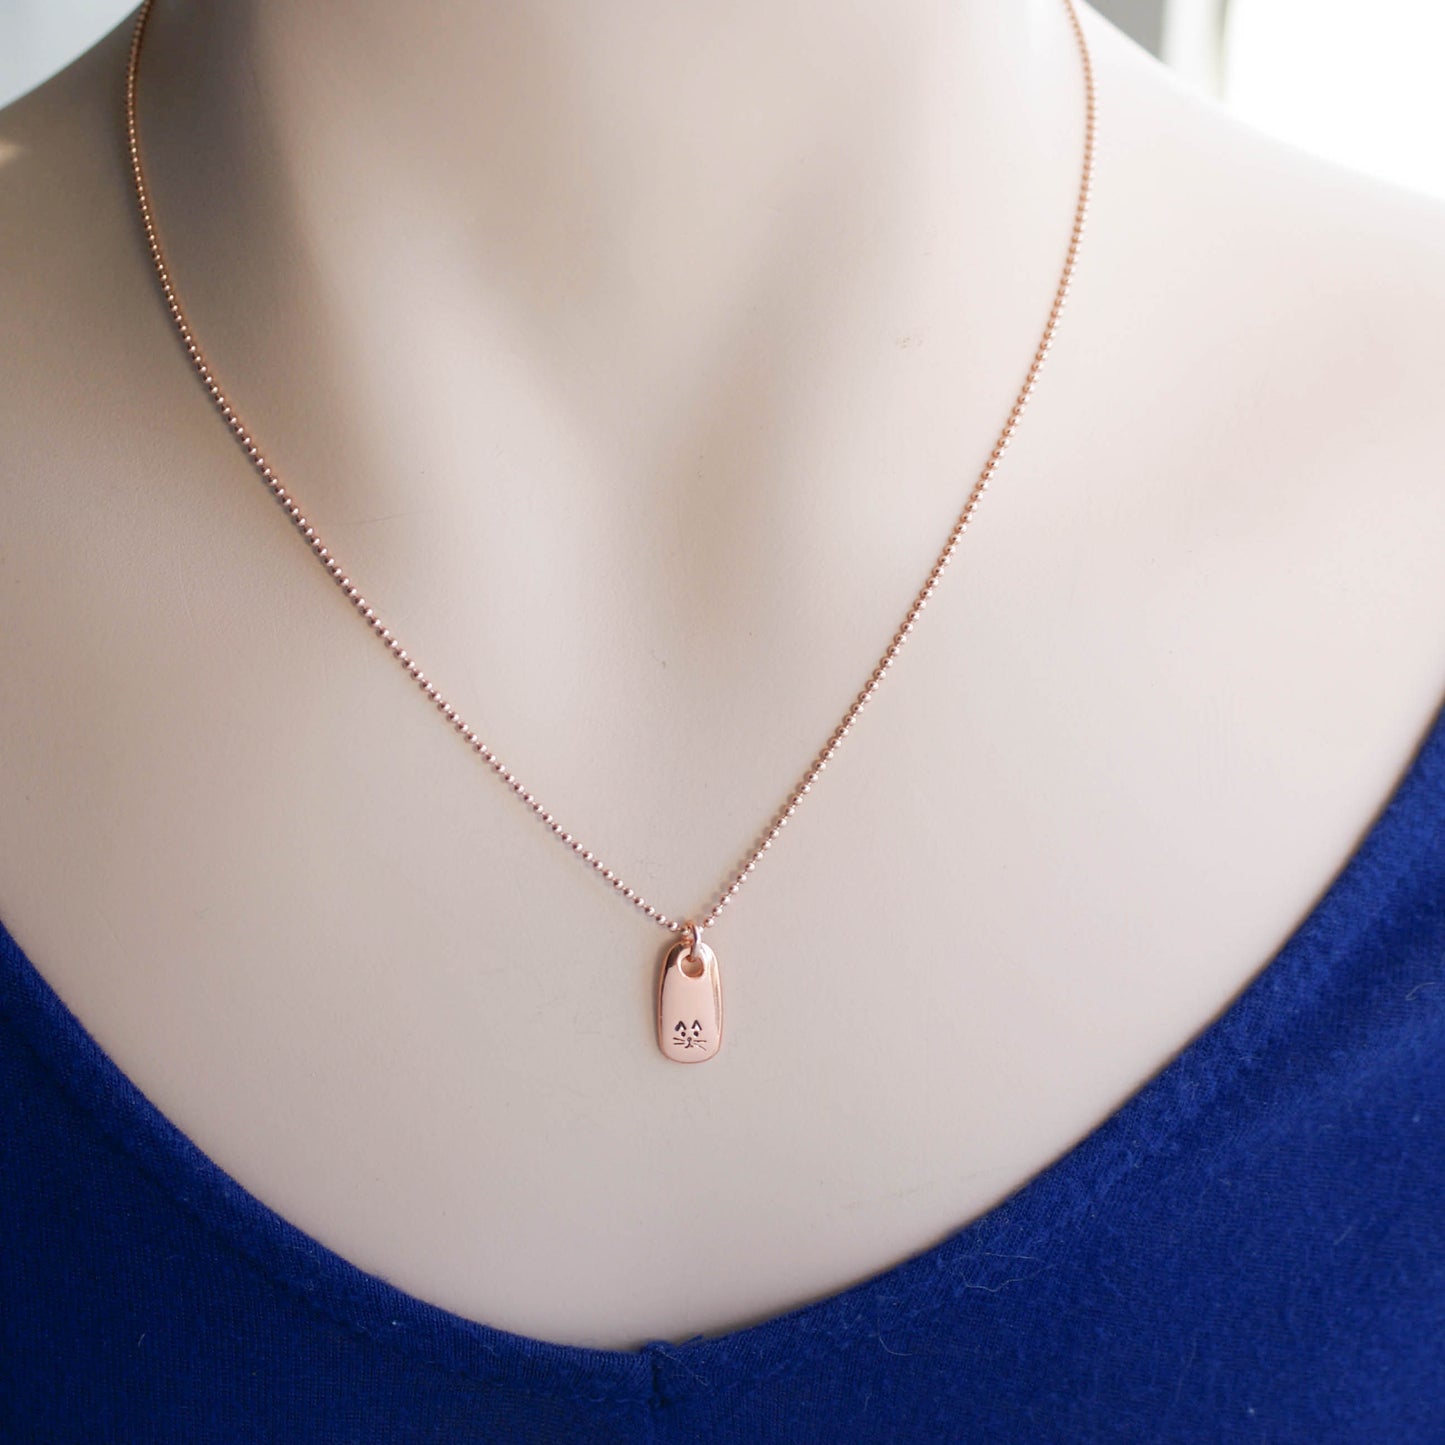 Petite Rose Gold Necklace handstamped with a kitty face on neck